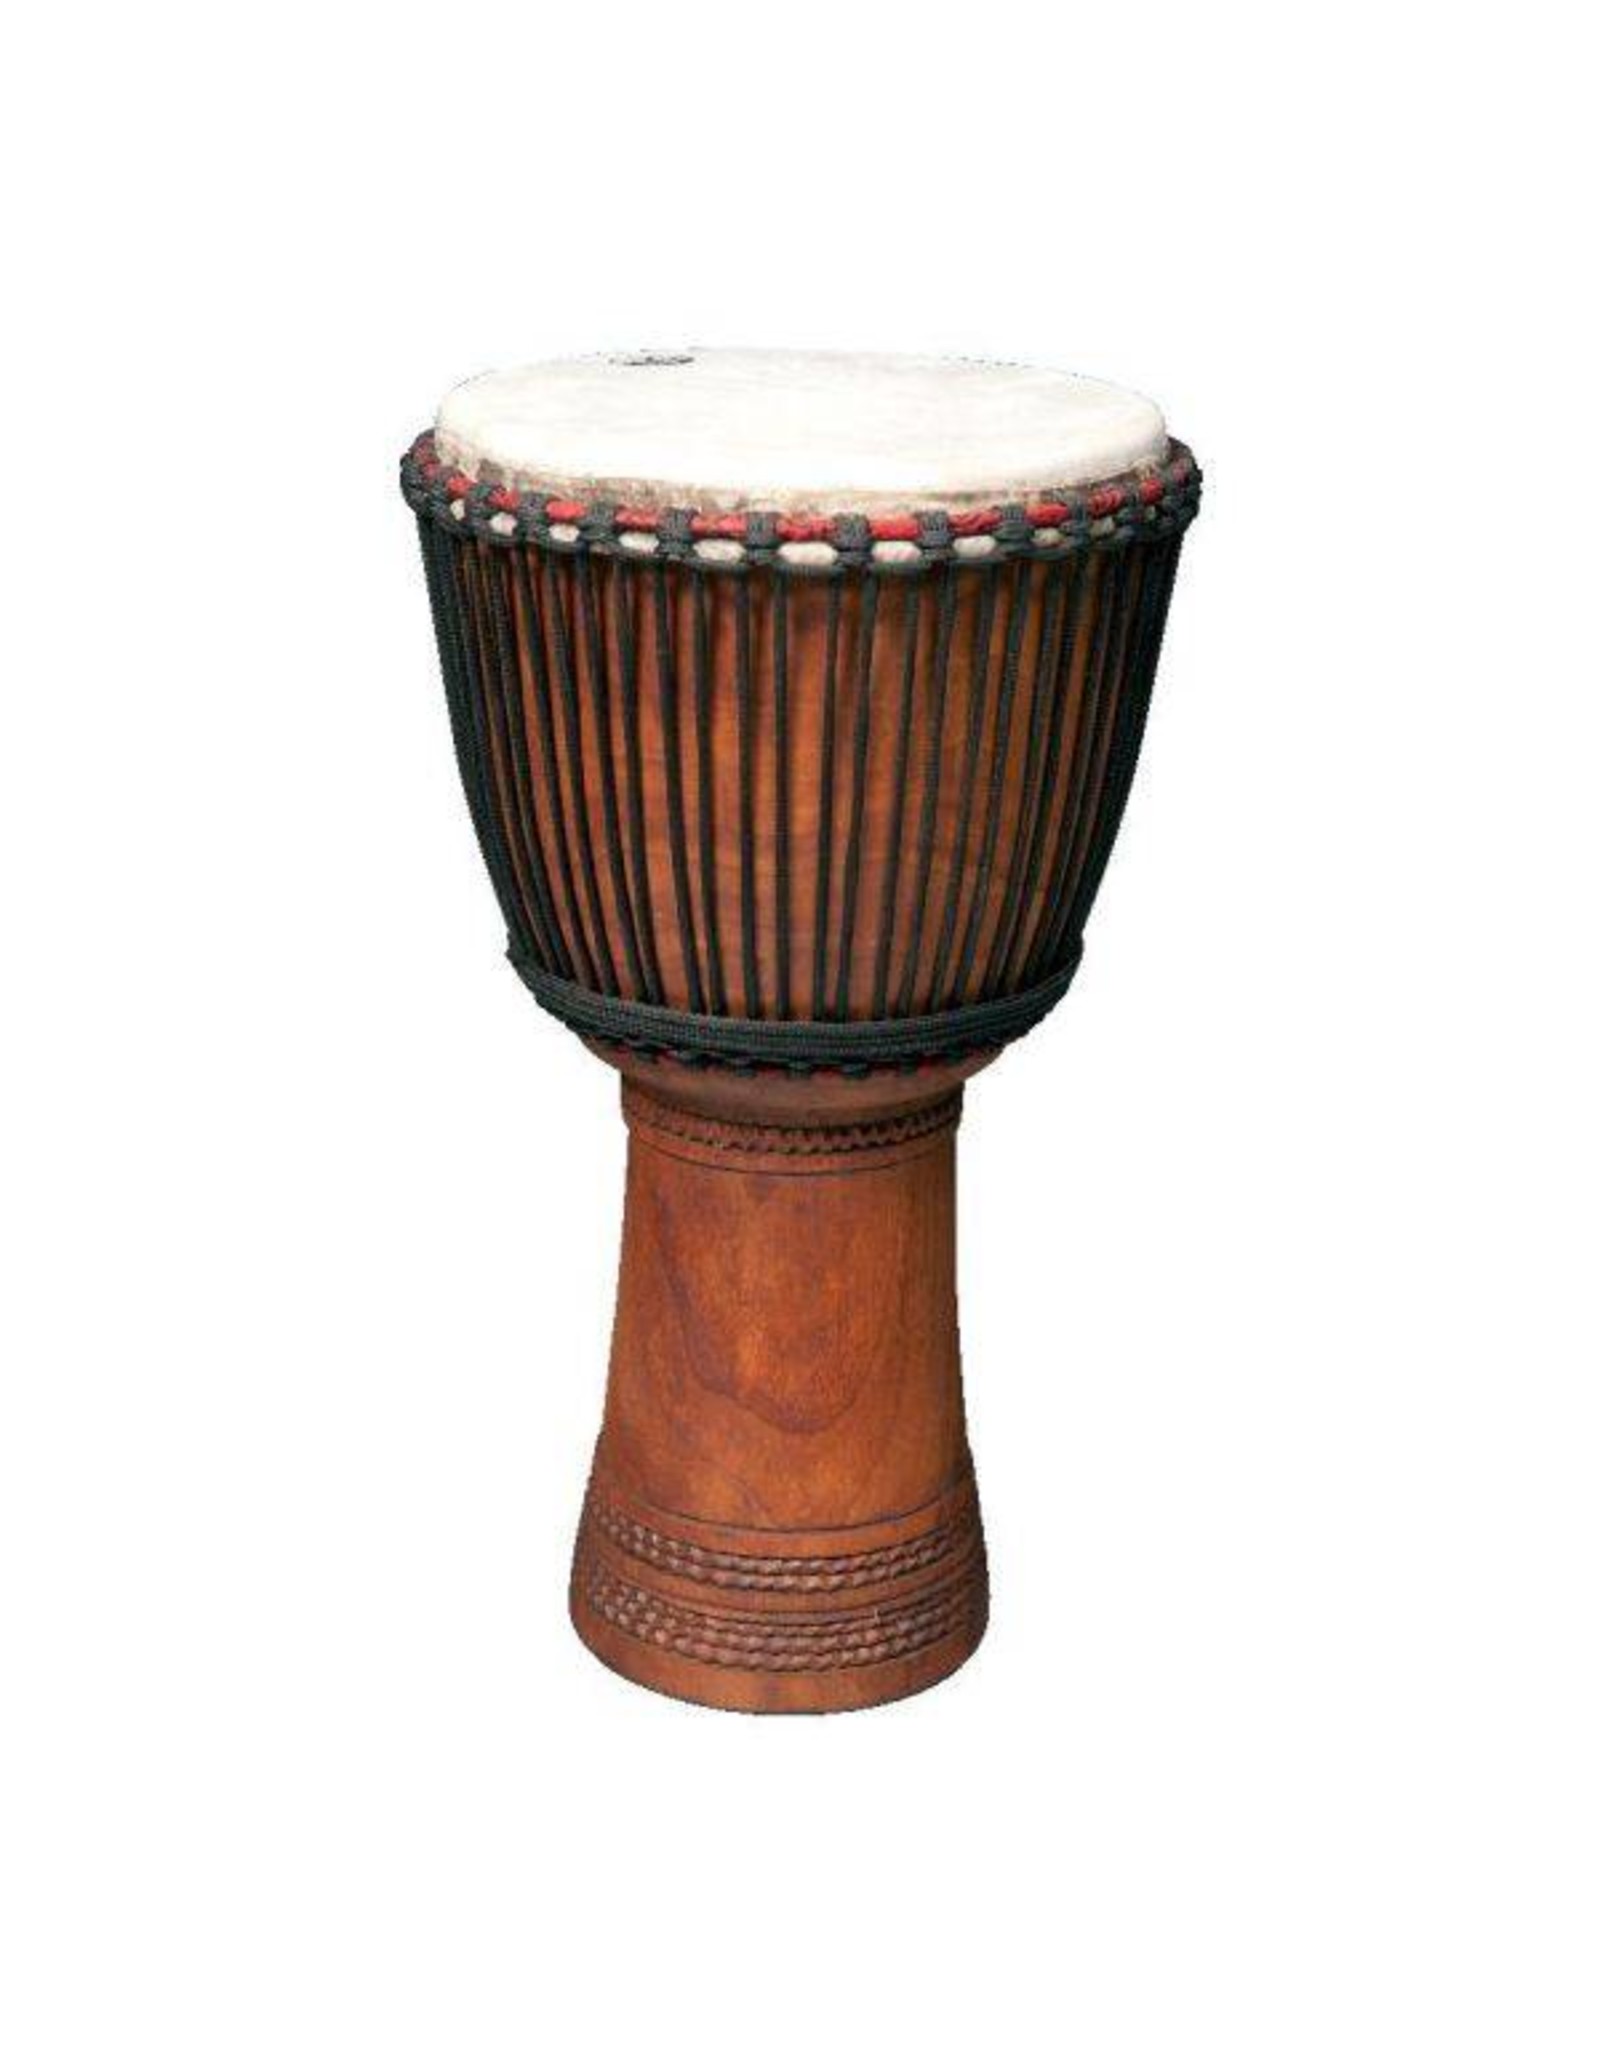 Busscherdrums Djembe rent for use during djembeles at Busscher Drums per course (10 classes followed)